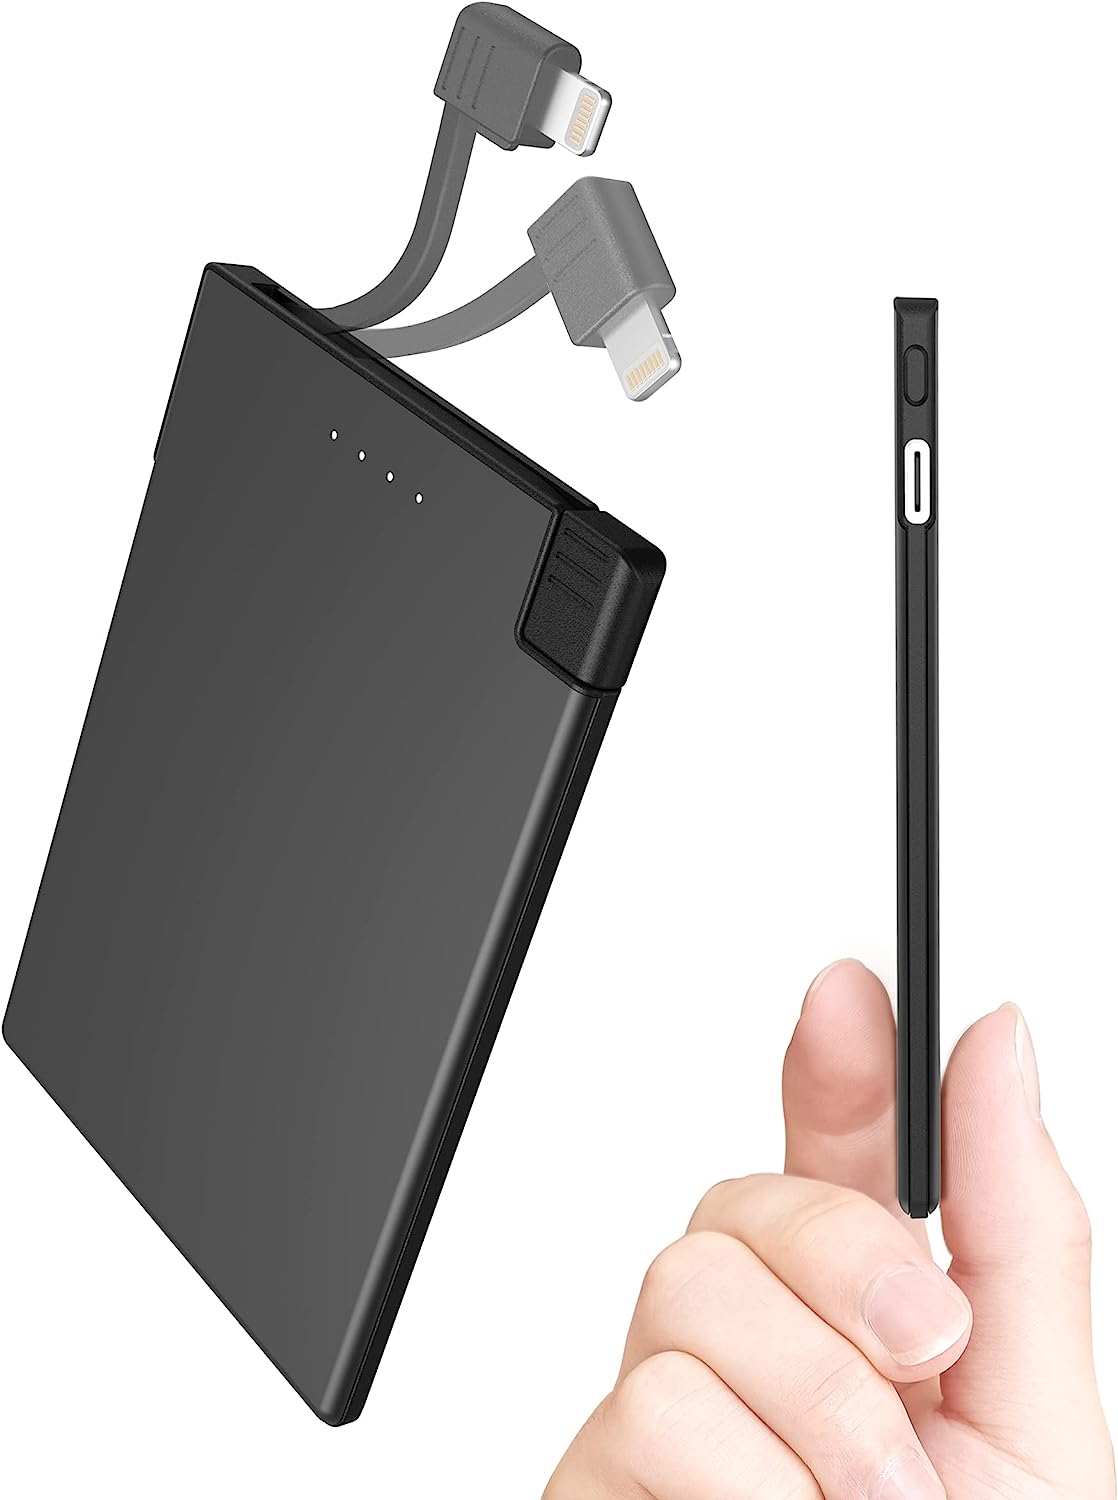 TNTOR Portable Charger for iPhone Built in Lightning [...]